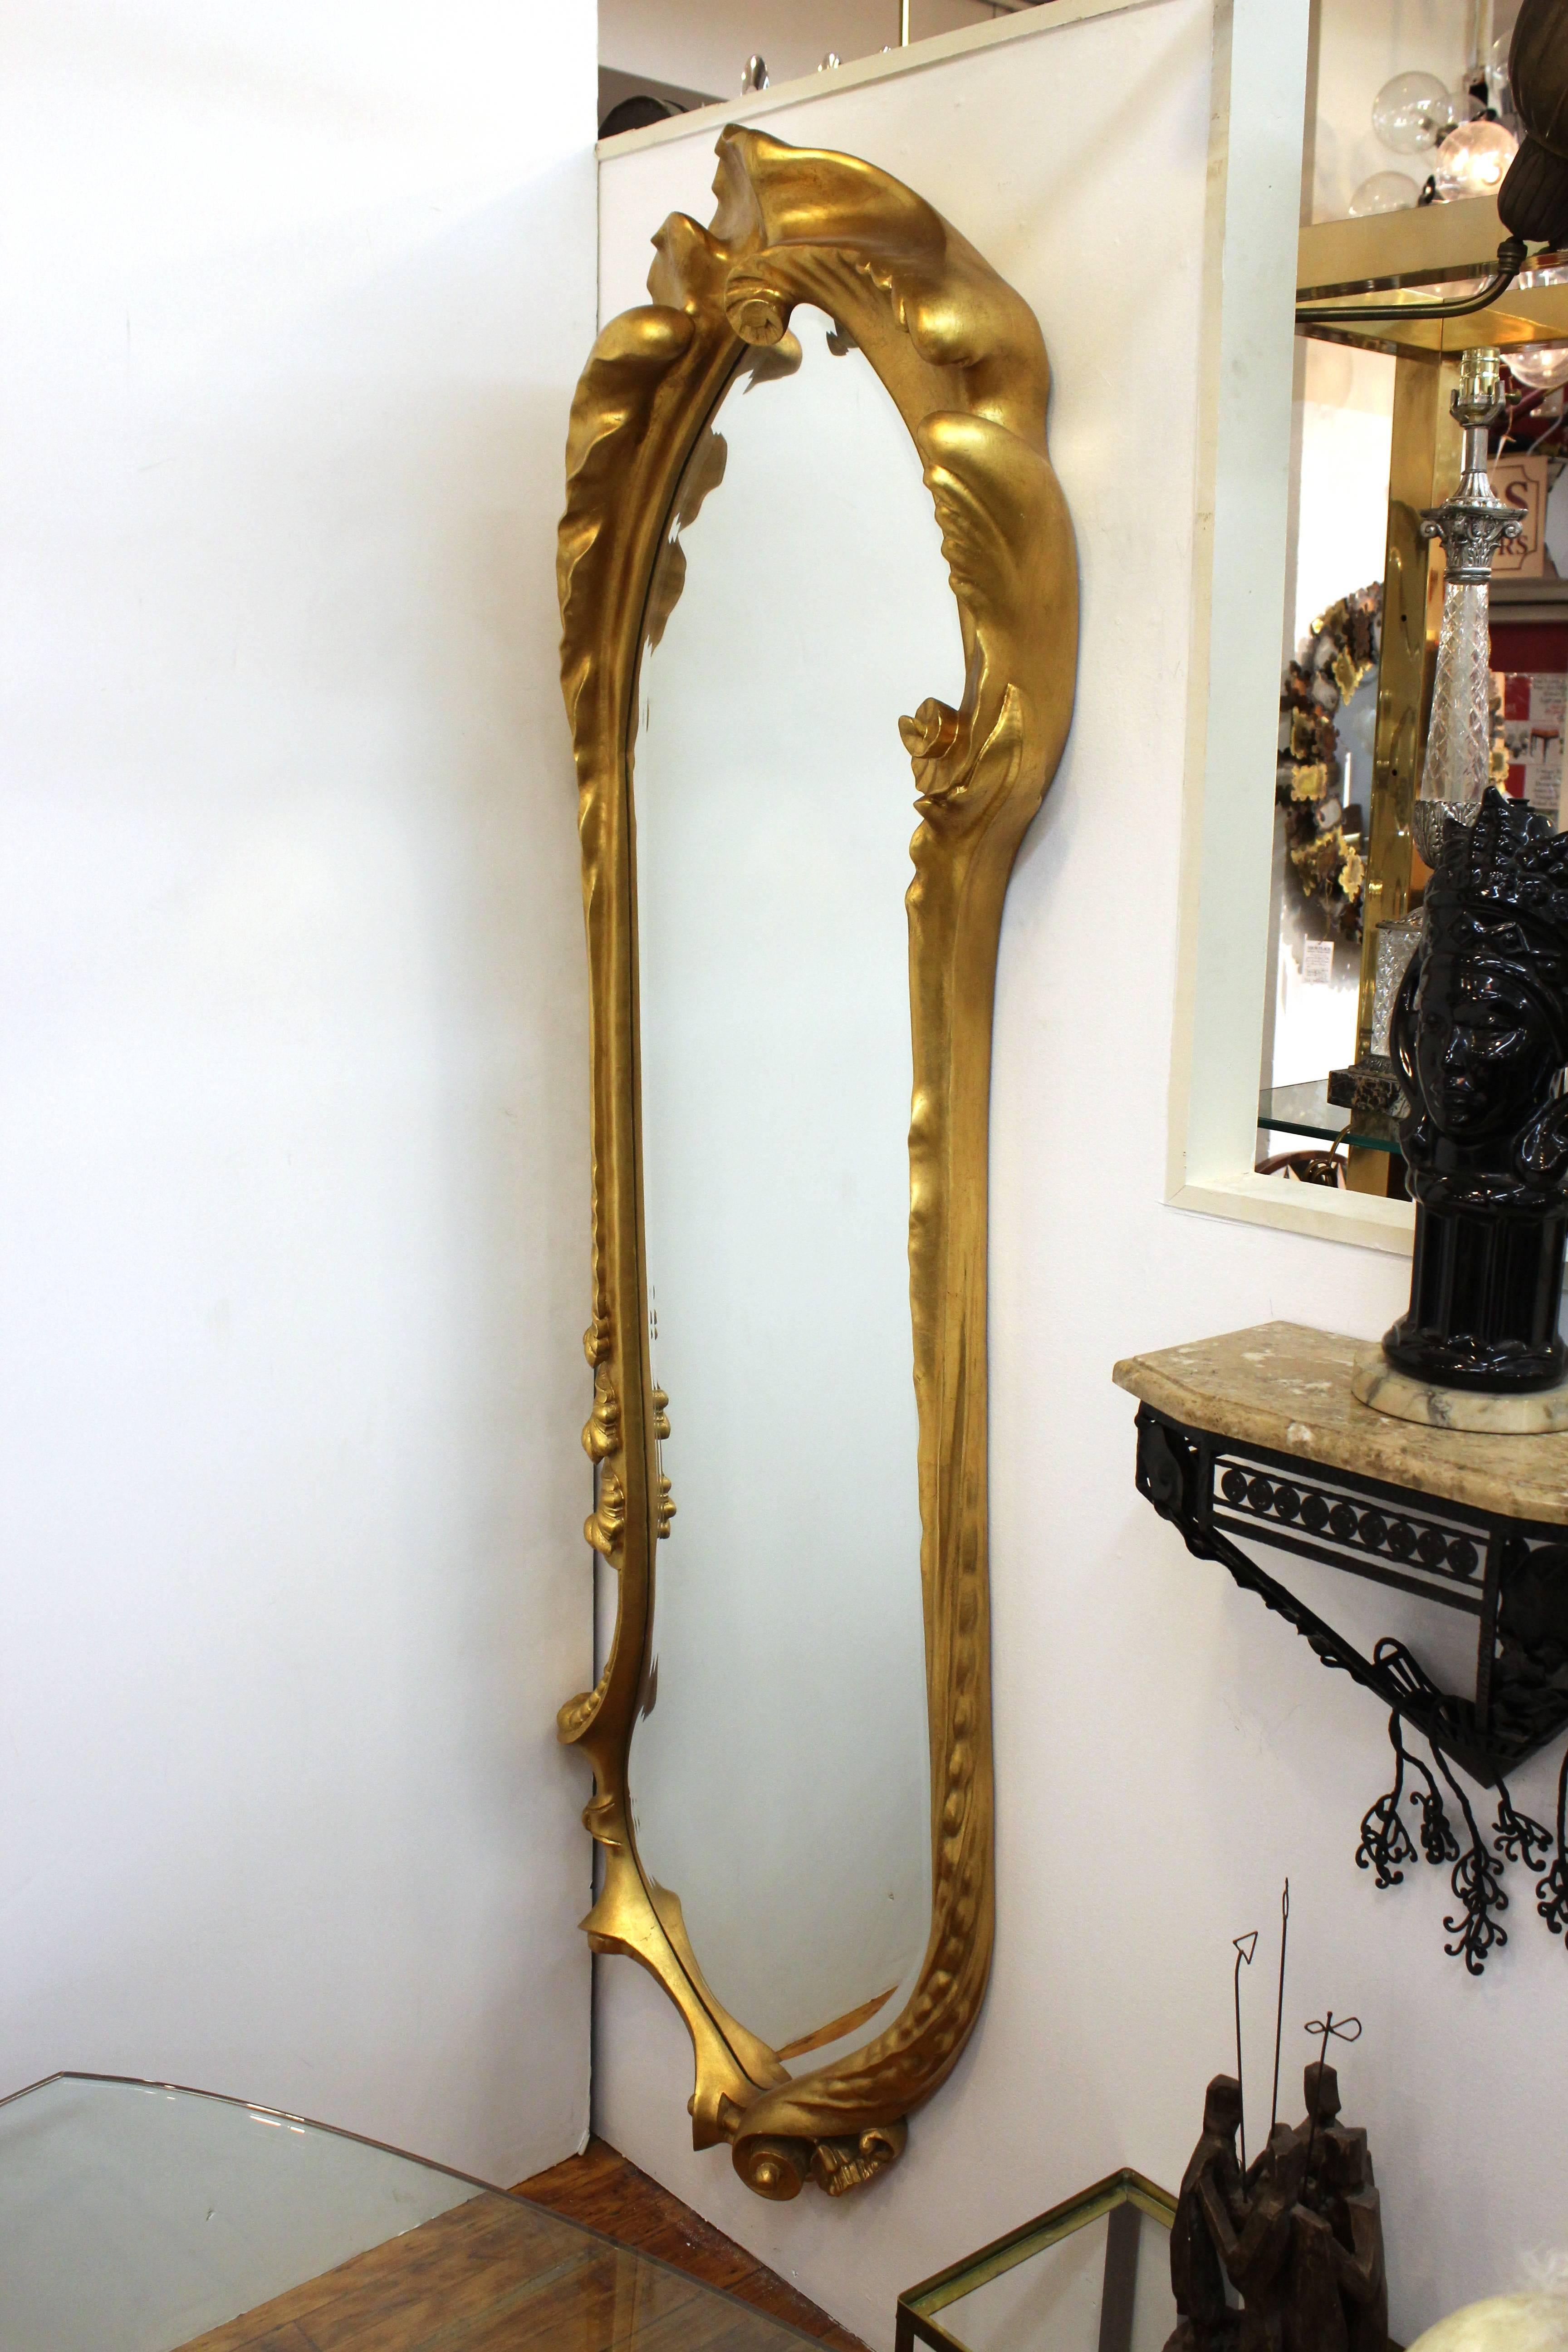 A monumental full-length wall mirror with an opulent carved giltwood frame, made in the 20th century. The frame presents an ornately carved naturalistic design with swirls and organic foliage. Good vintage condition consistent with age and use.